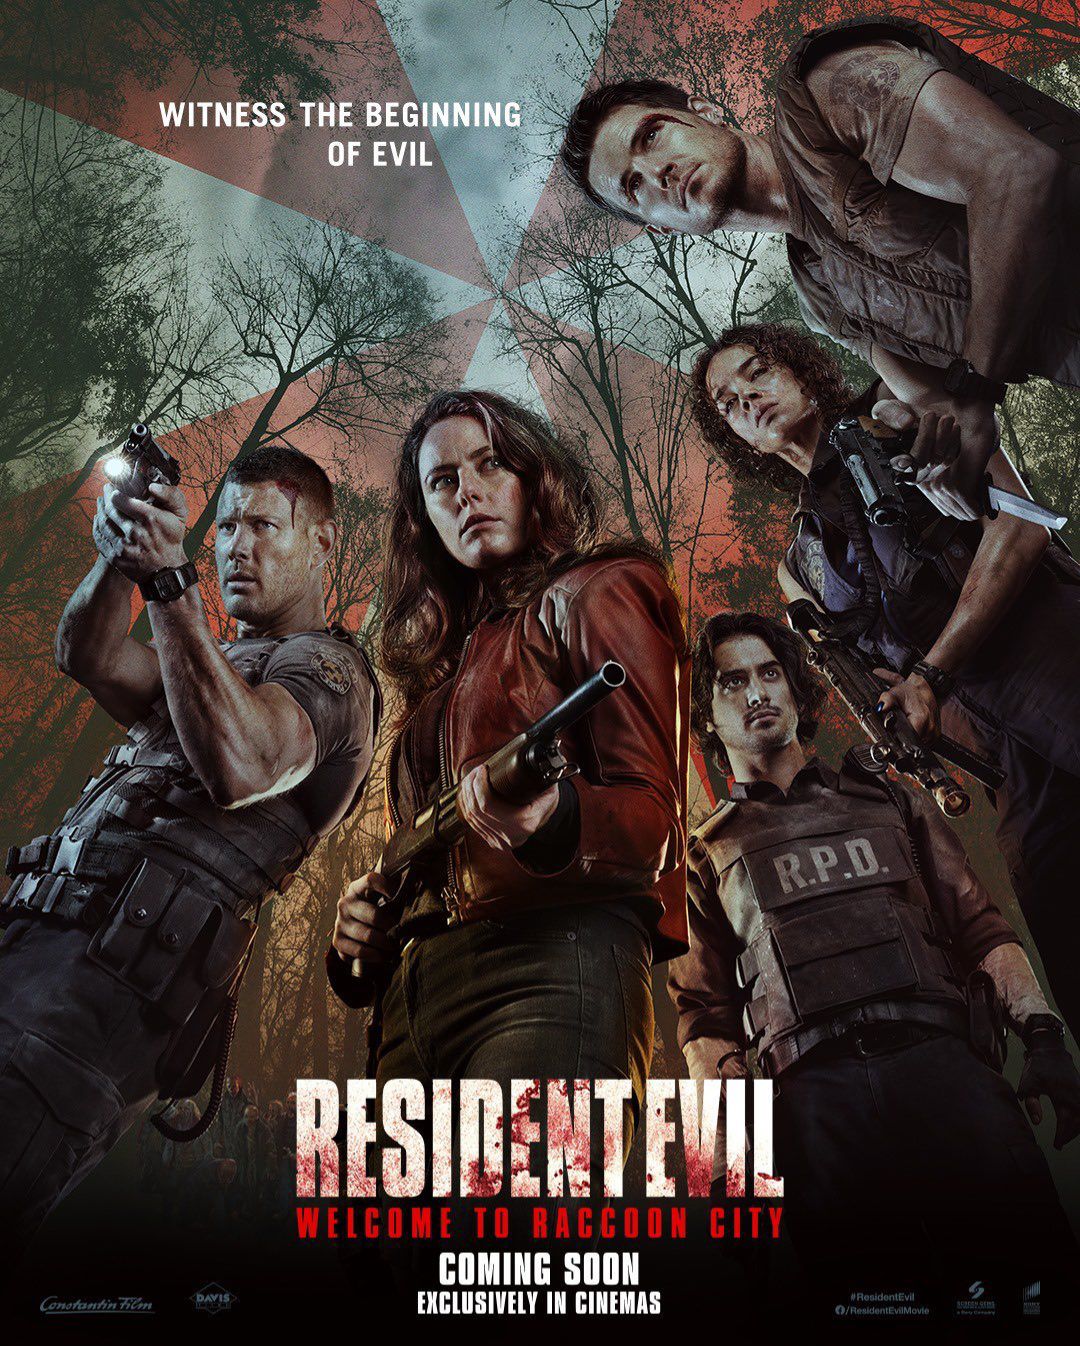 Resident Evil Welcome to Raccoon City image #1